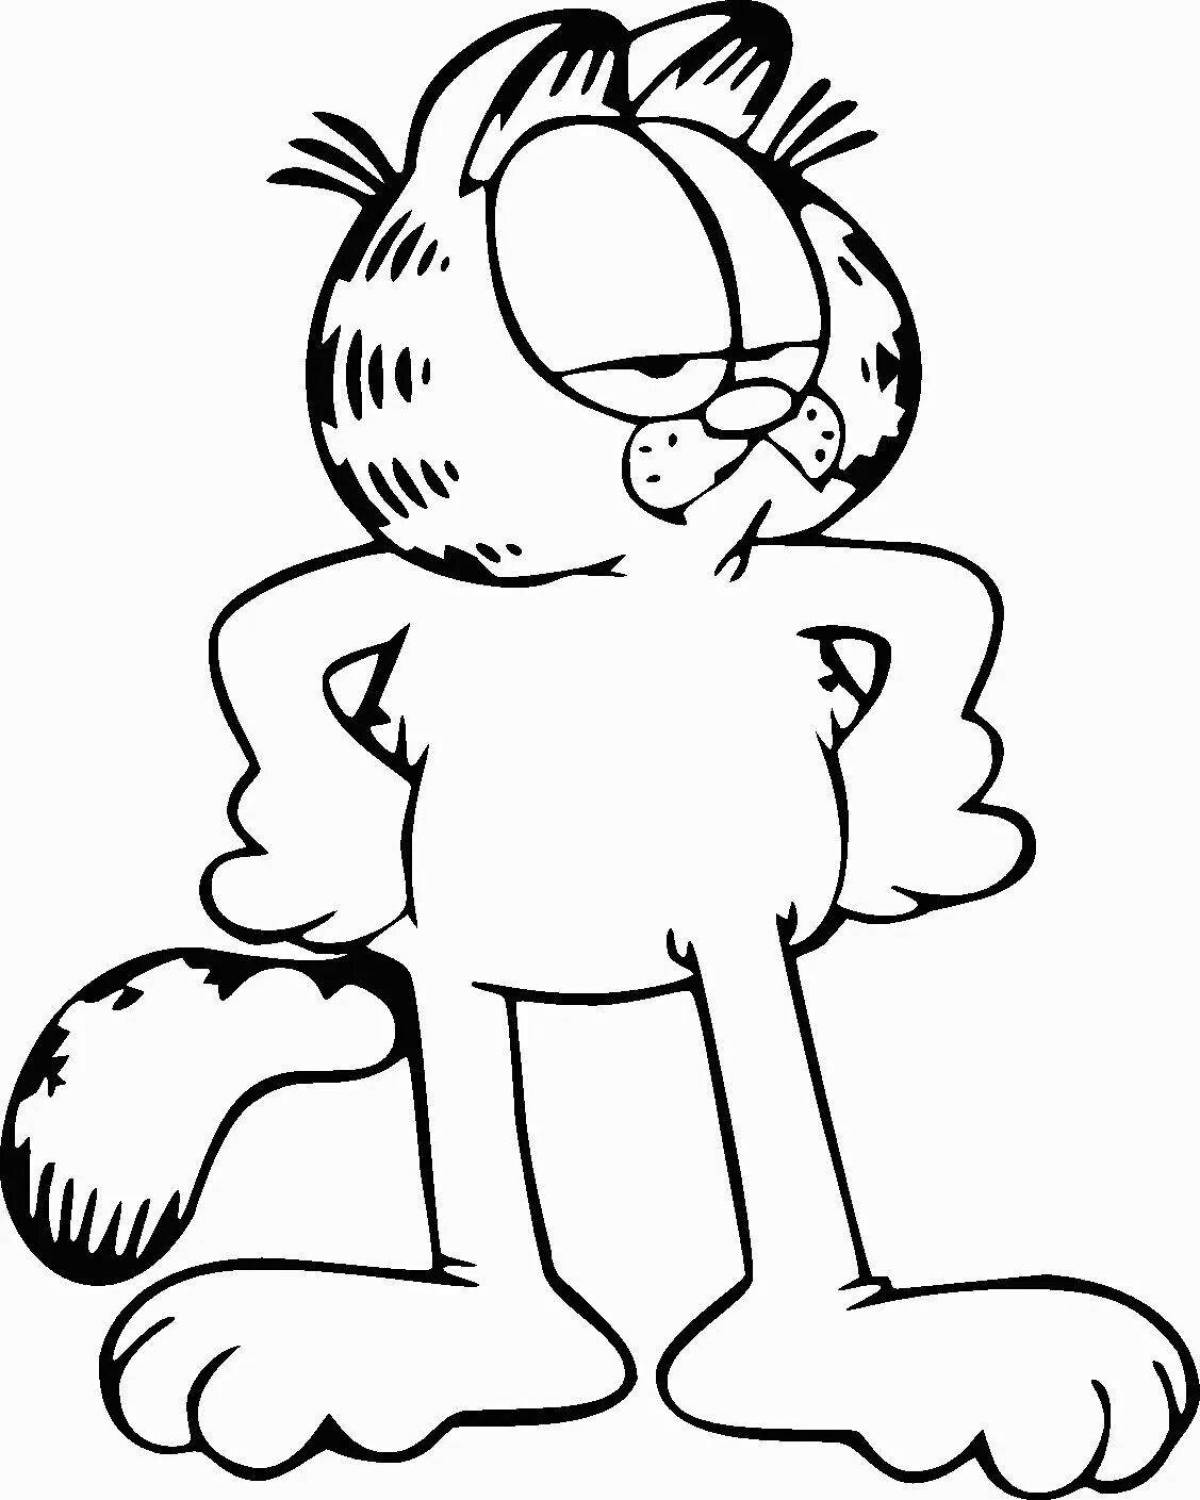 An animated garfield coloring page